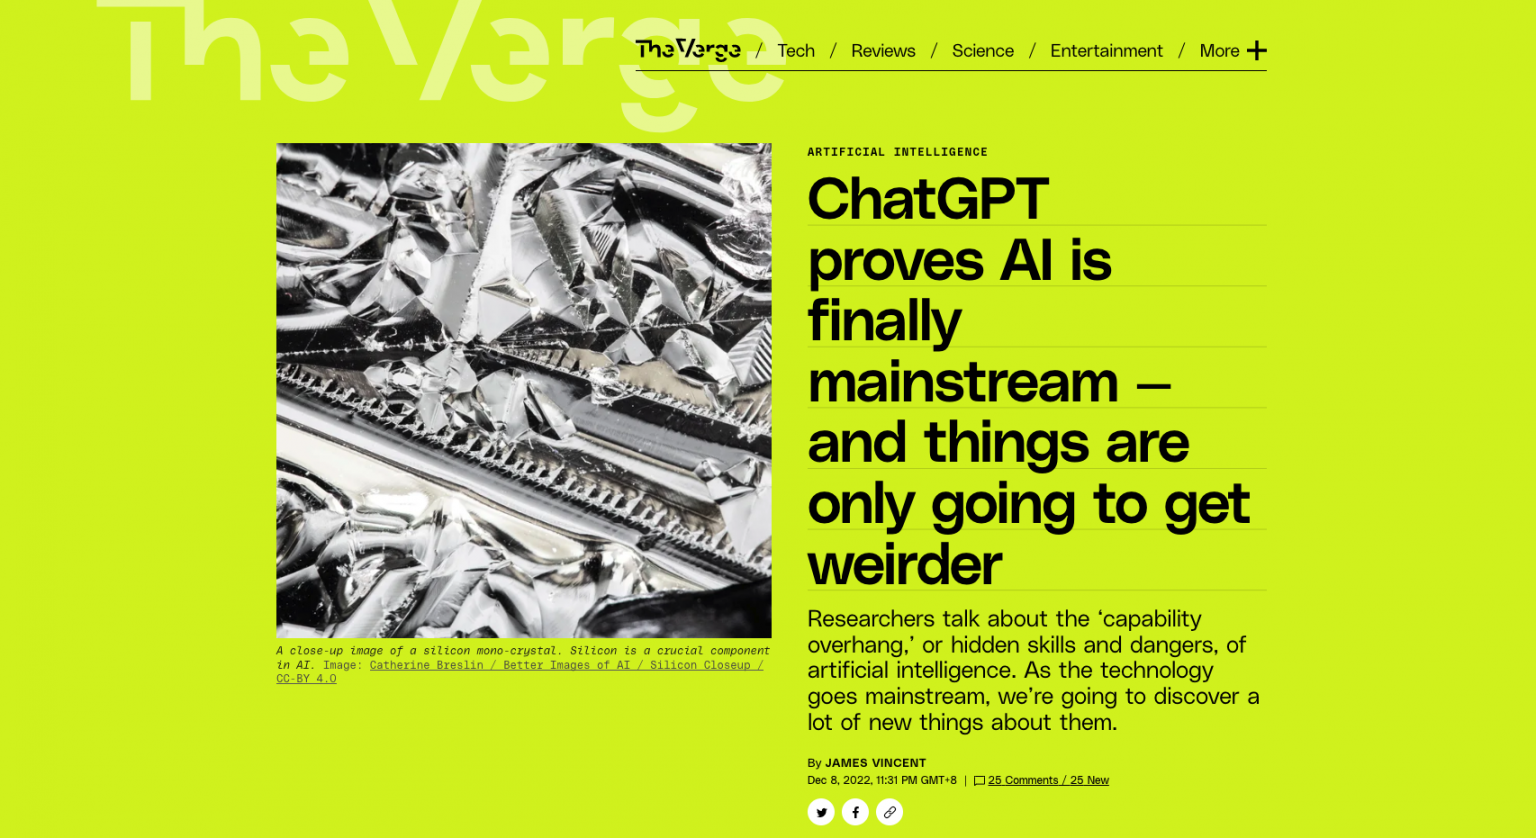 ChatGPT Open AI: Why You Should Avoid Chat Gpt As Student?